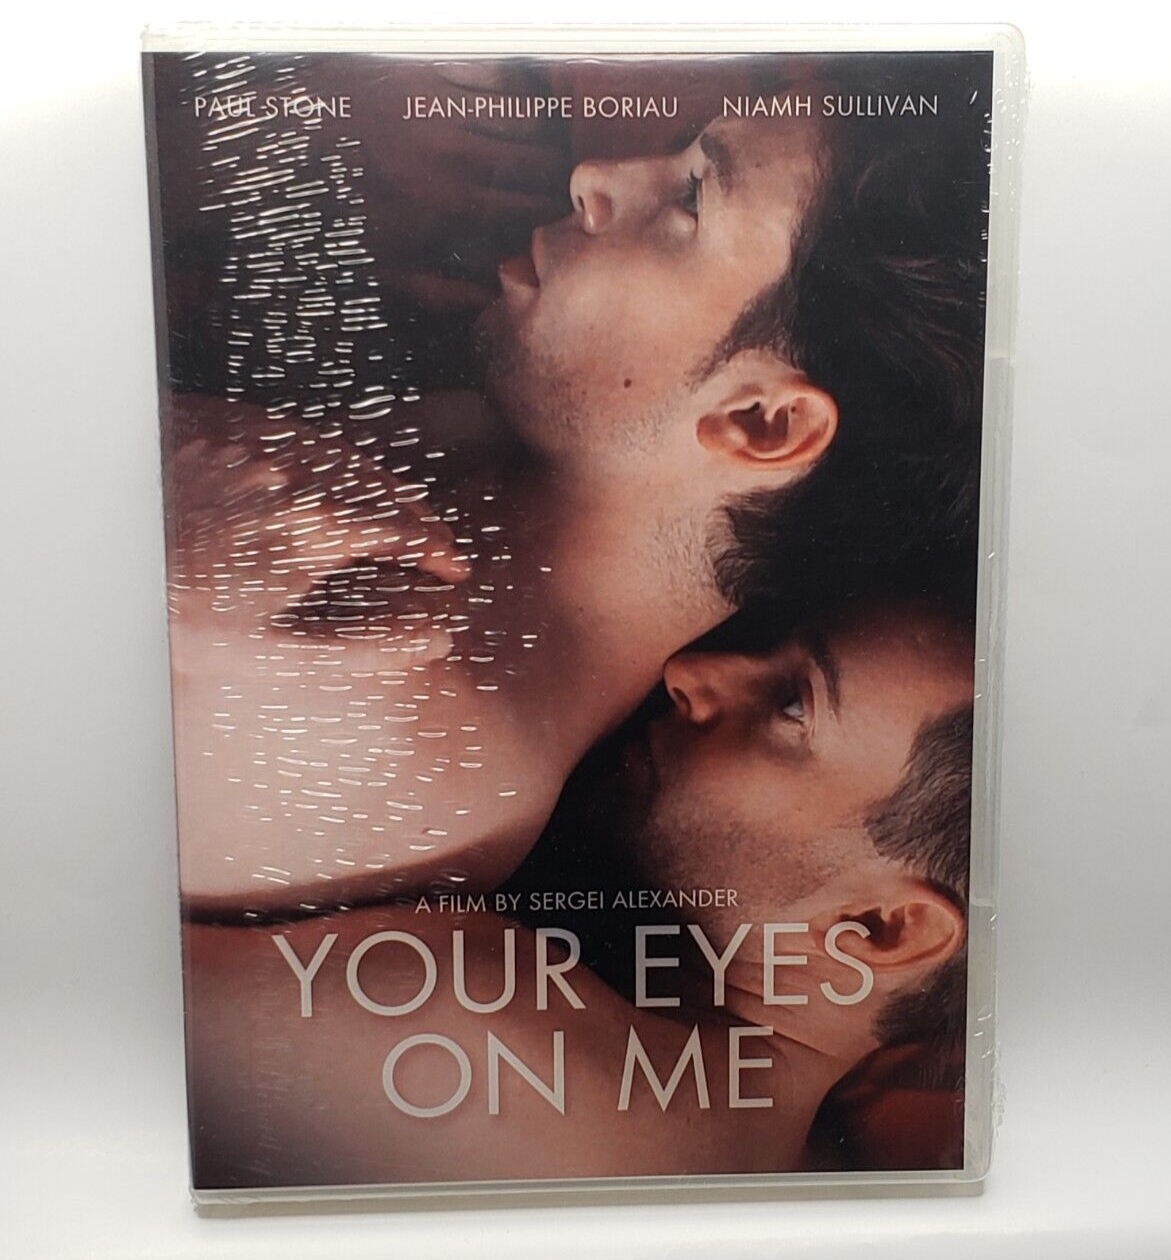 Your Eyes on Me (DVD-R, 2020, Gay Interest) Paul Stone, Jean